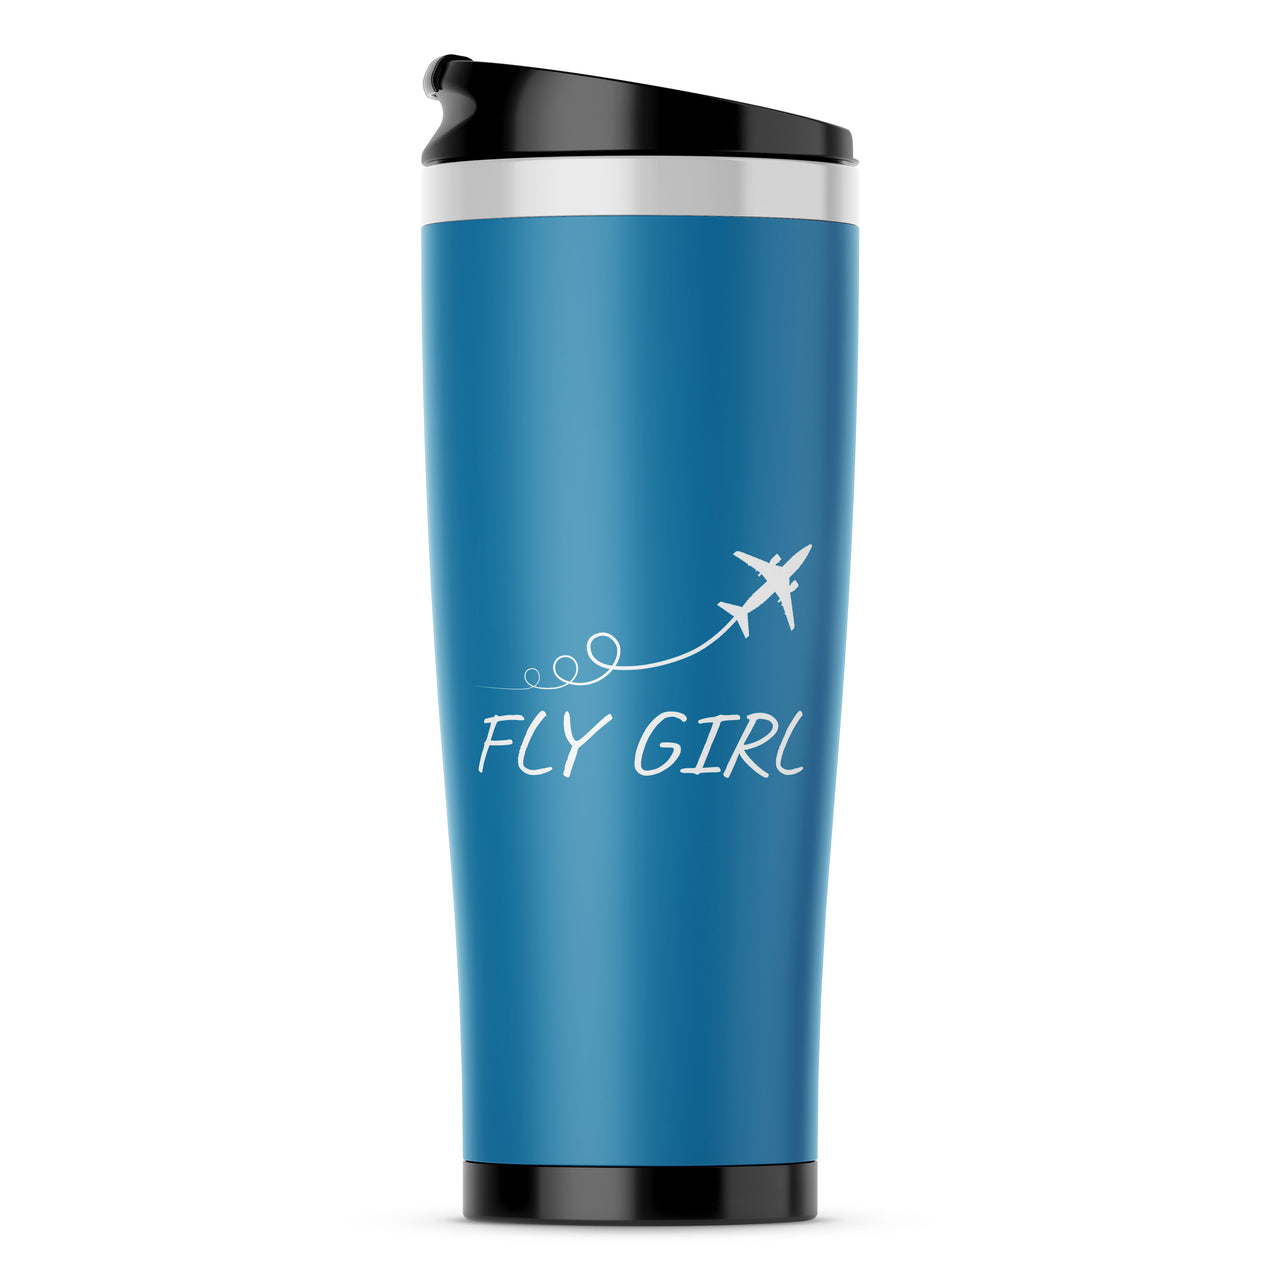 Just Fly It & Fly Girl Designed Travel Mugs